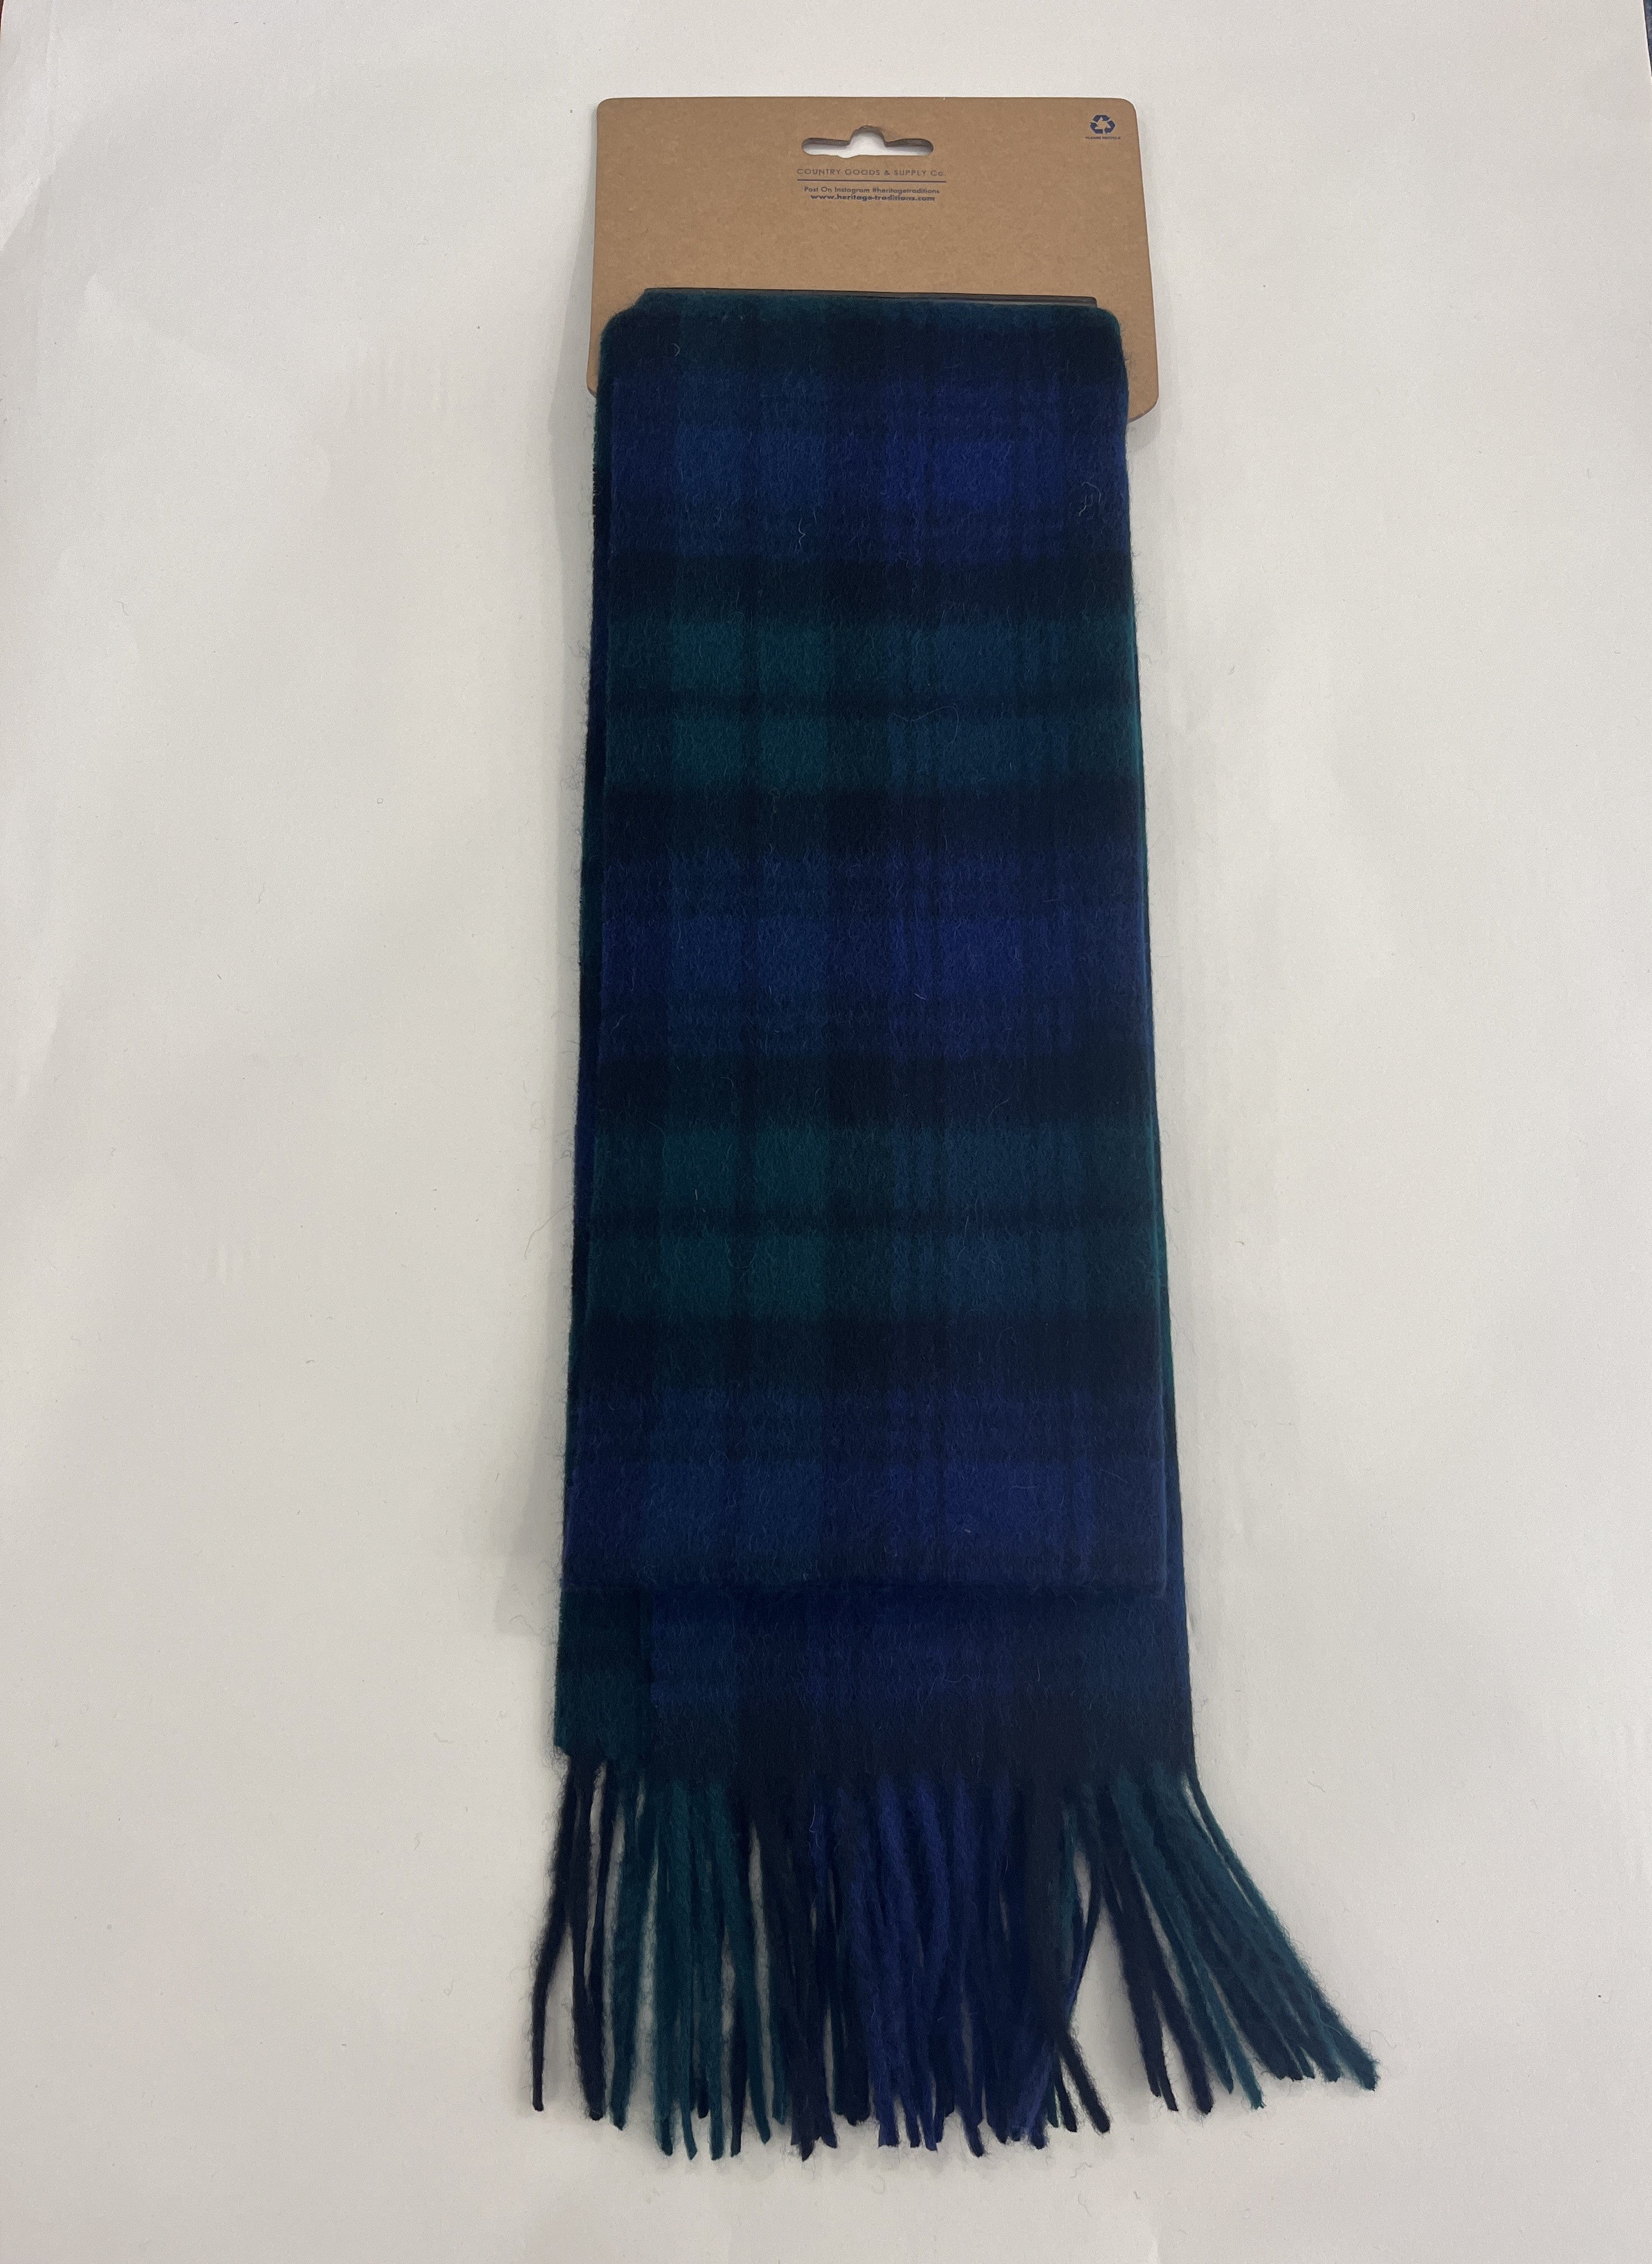 HERITAGE TRADITIONS BLUE AND GREEN TARTAN SCARF